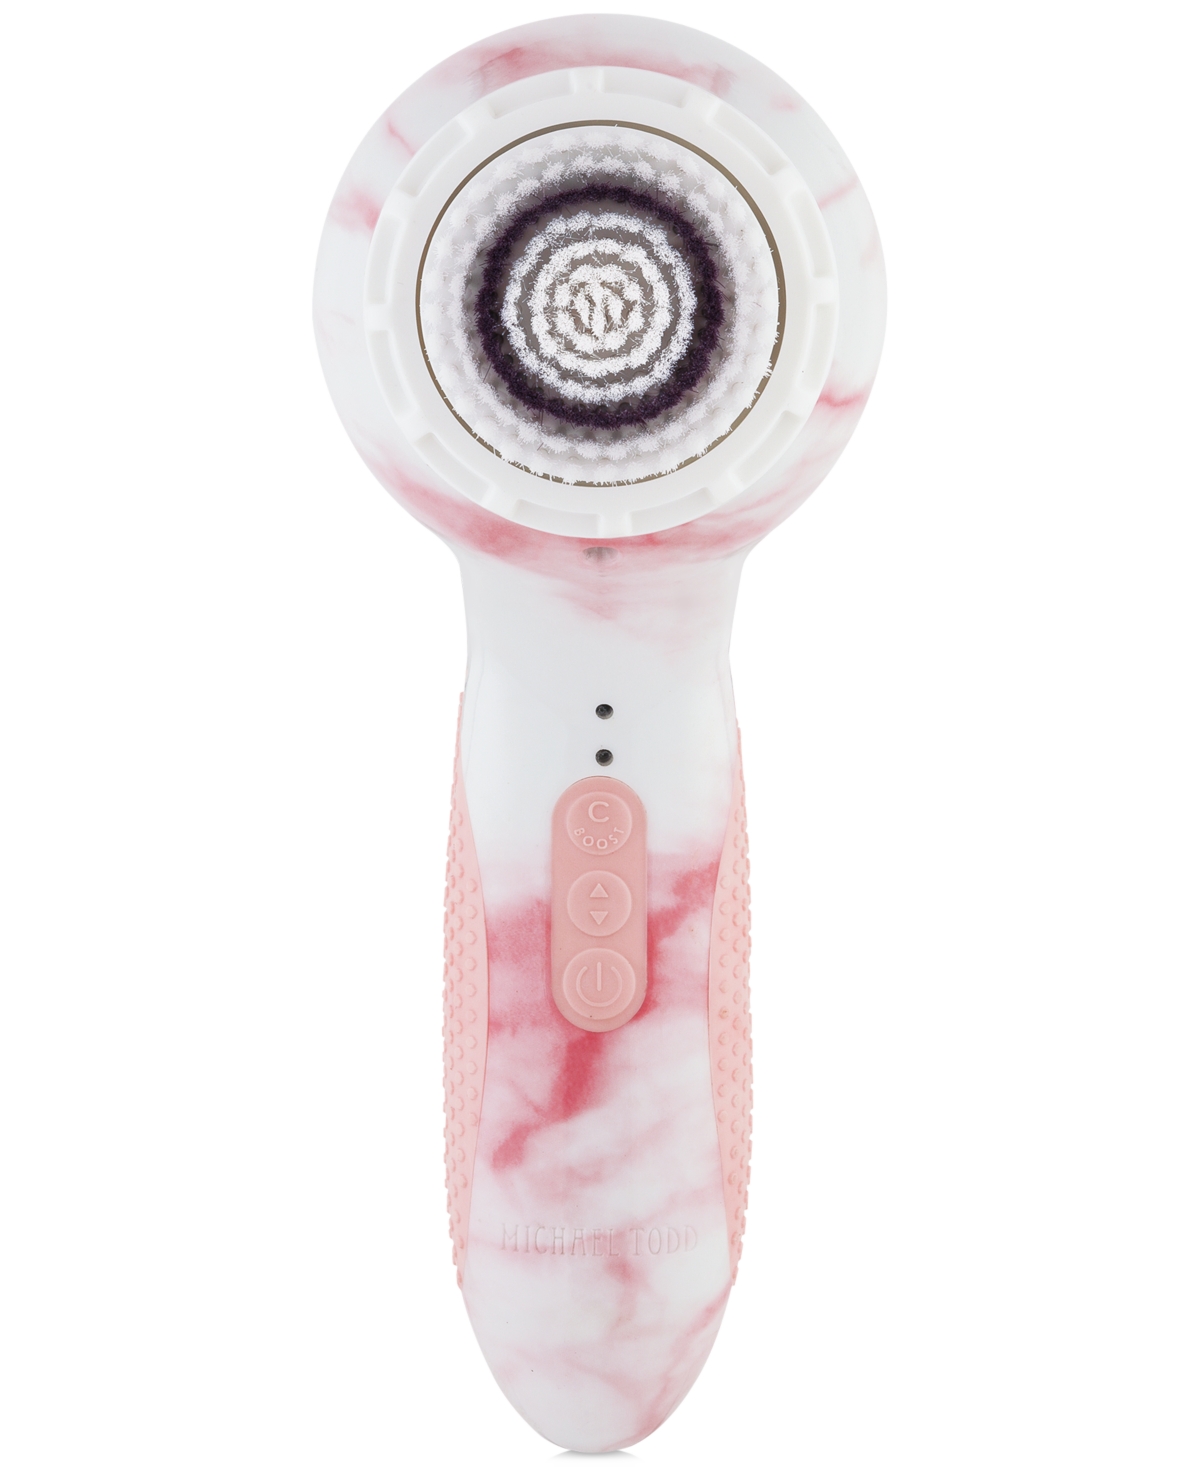 Soniclear Elite Sonic Facial Cleansing System - Rose Metal